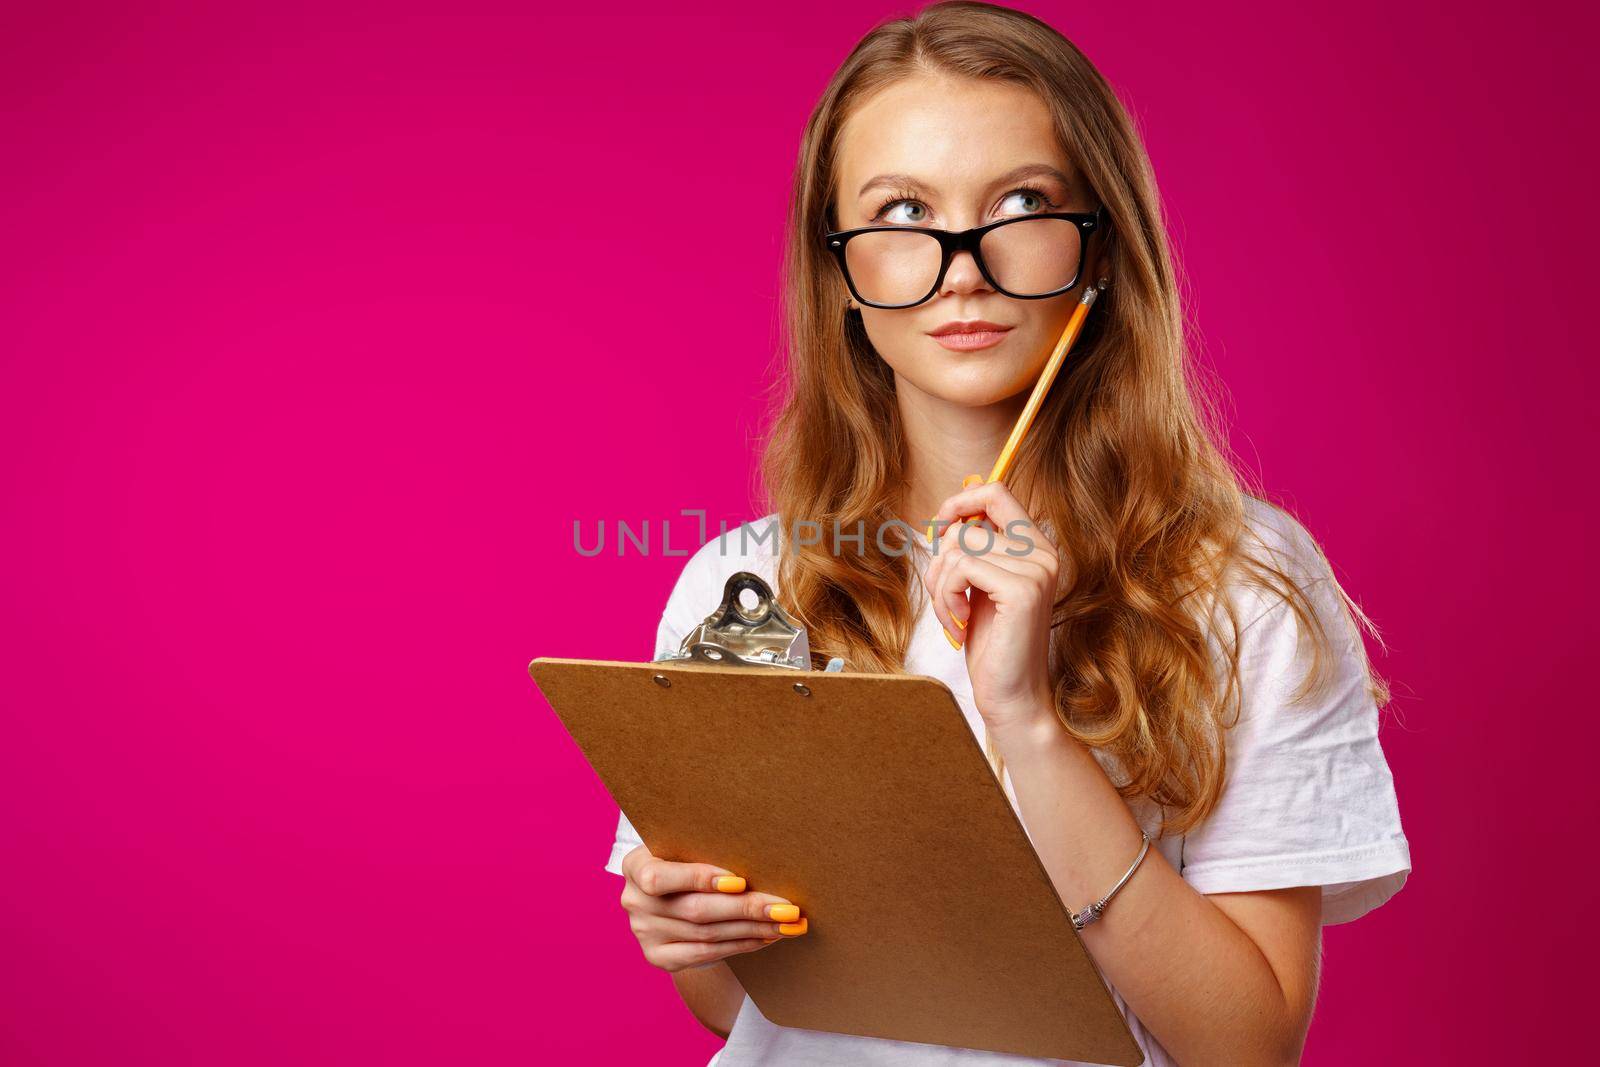 Young beautiful smiling woman standing and holding clipboard against pink background